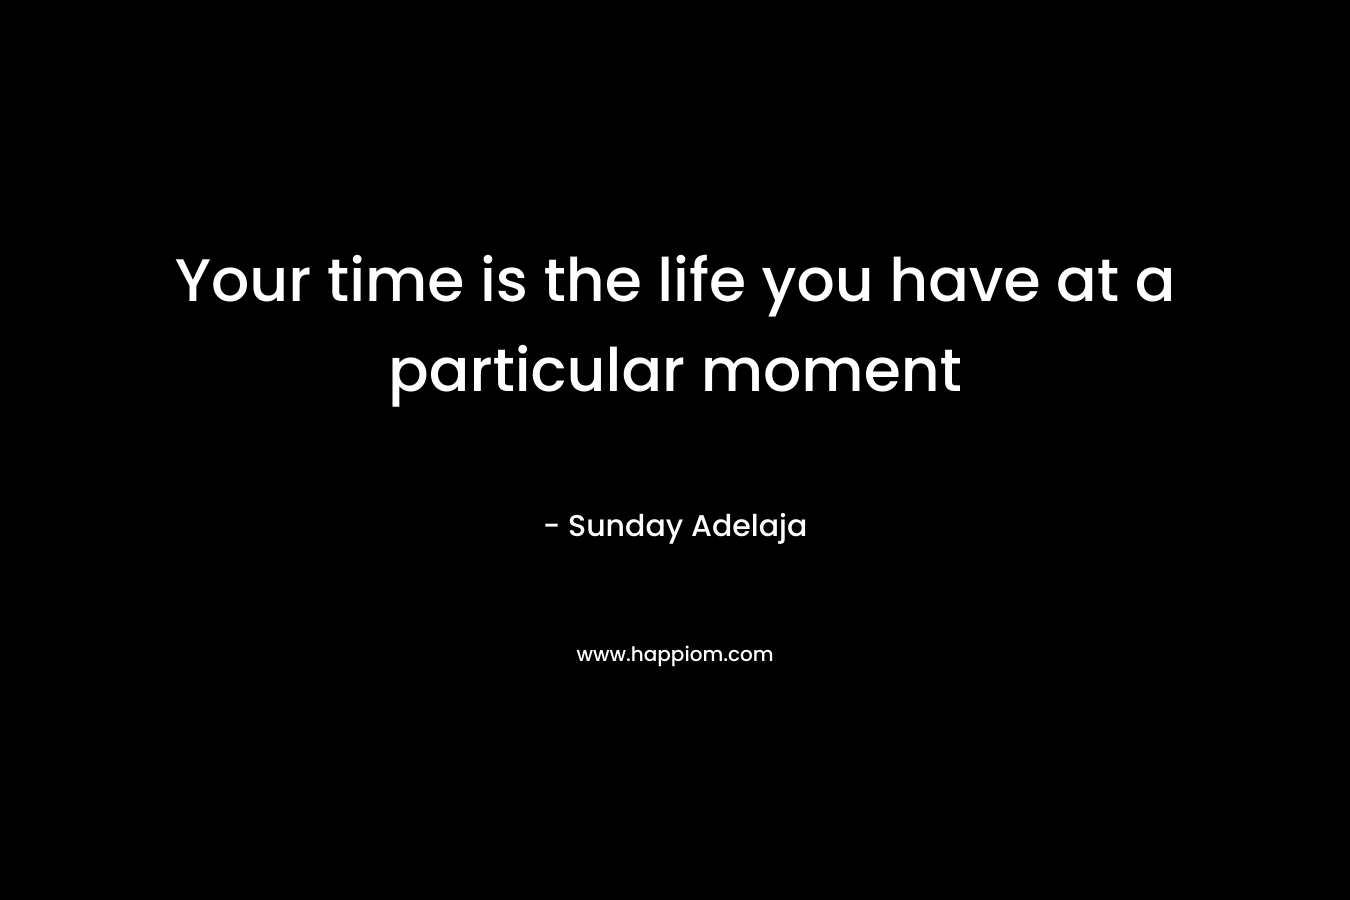 Your time is the life you have at a particular moment